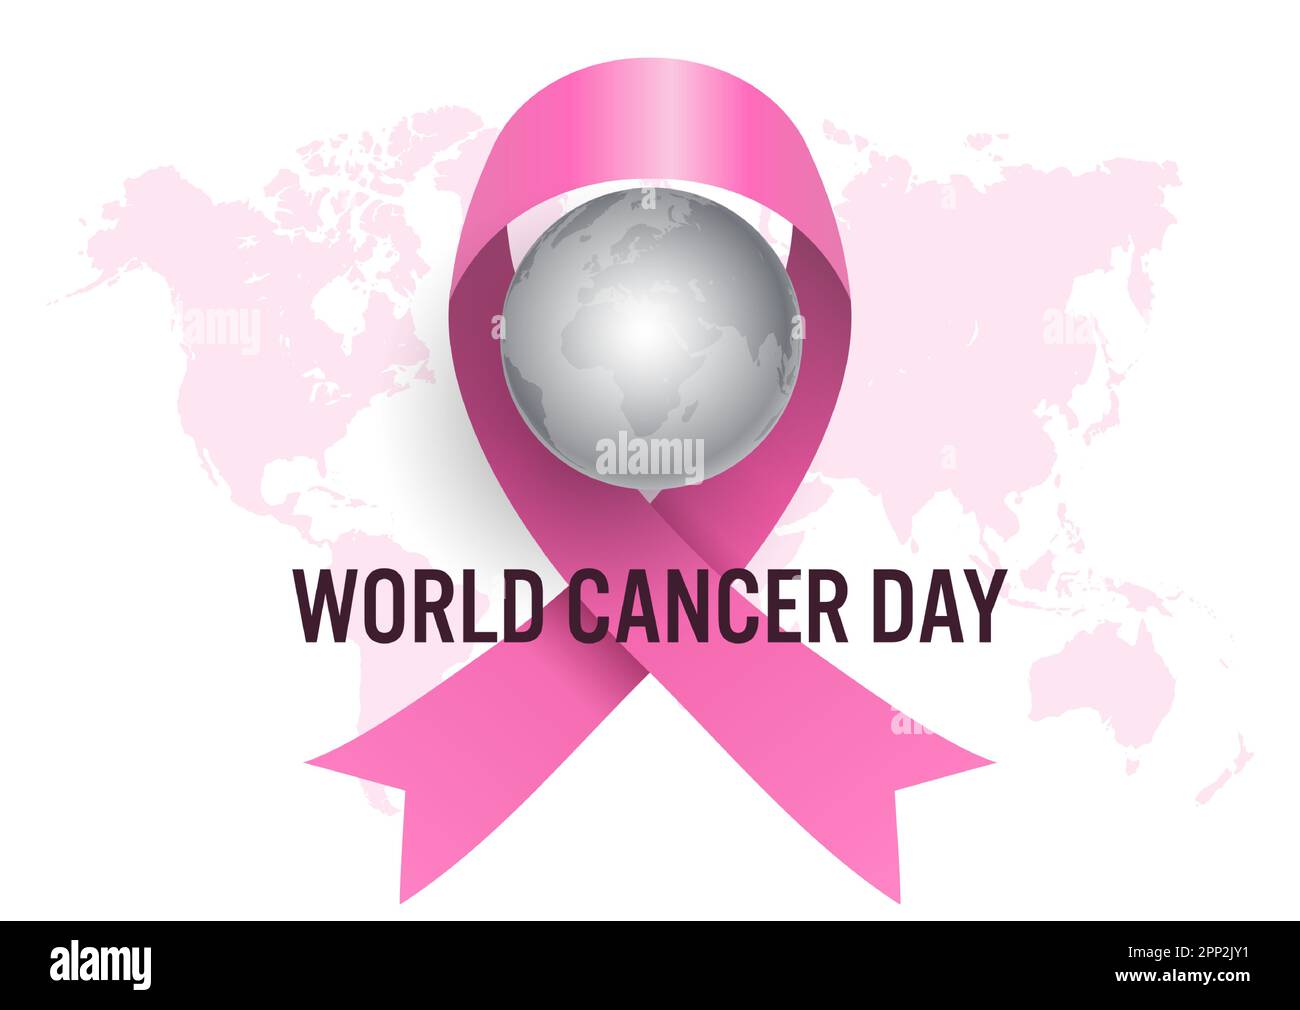 World cancer day background with pink ribbon and globe design Stock Vector